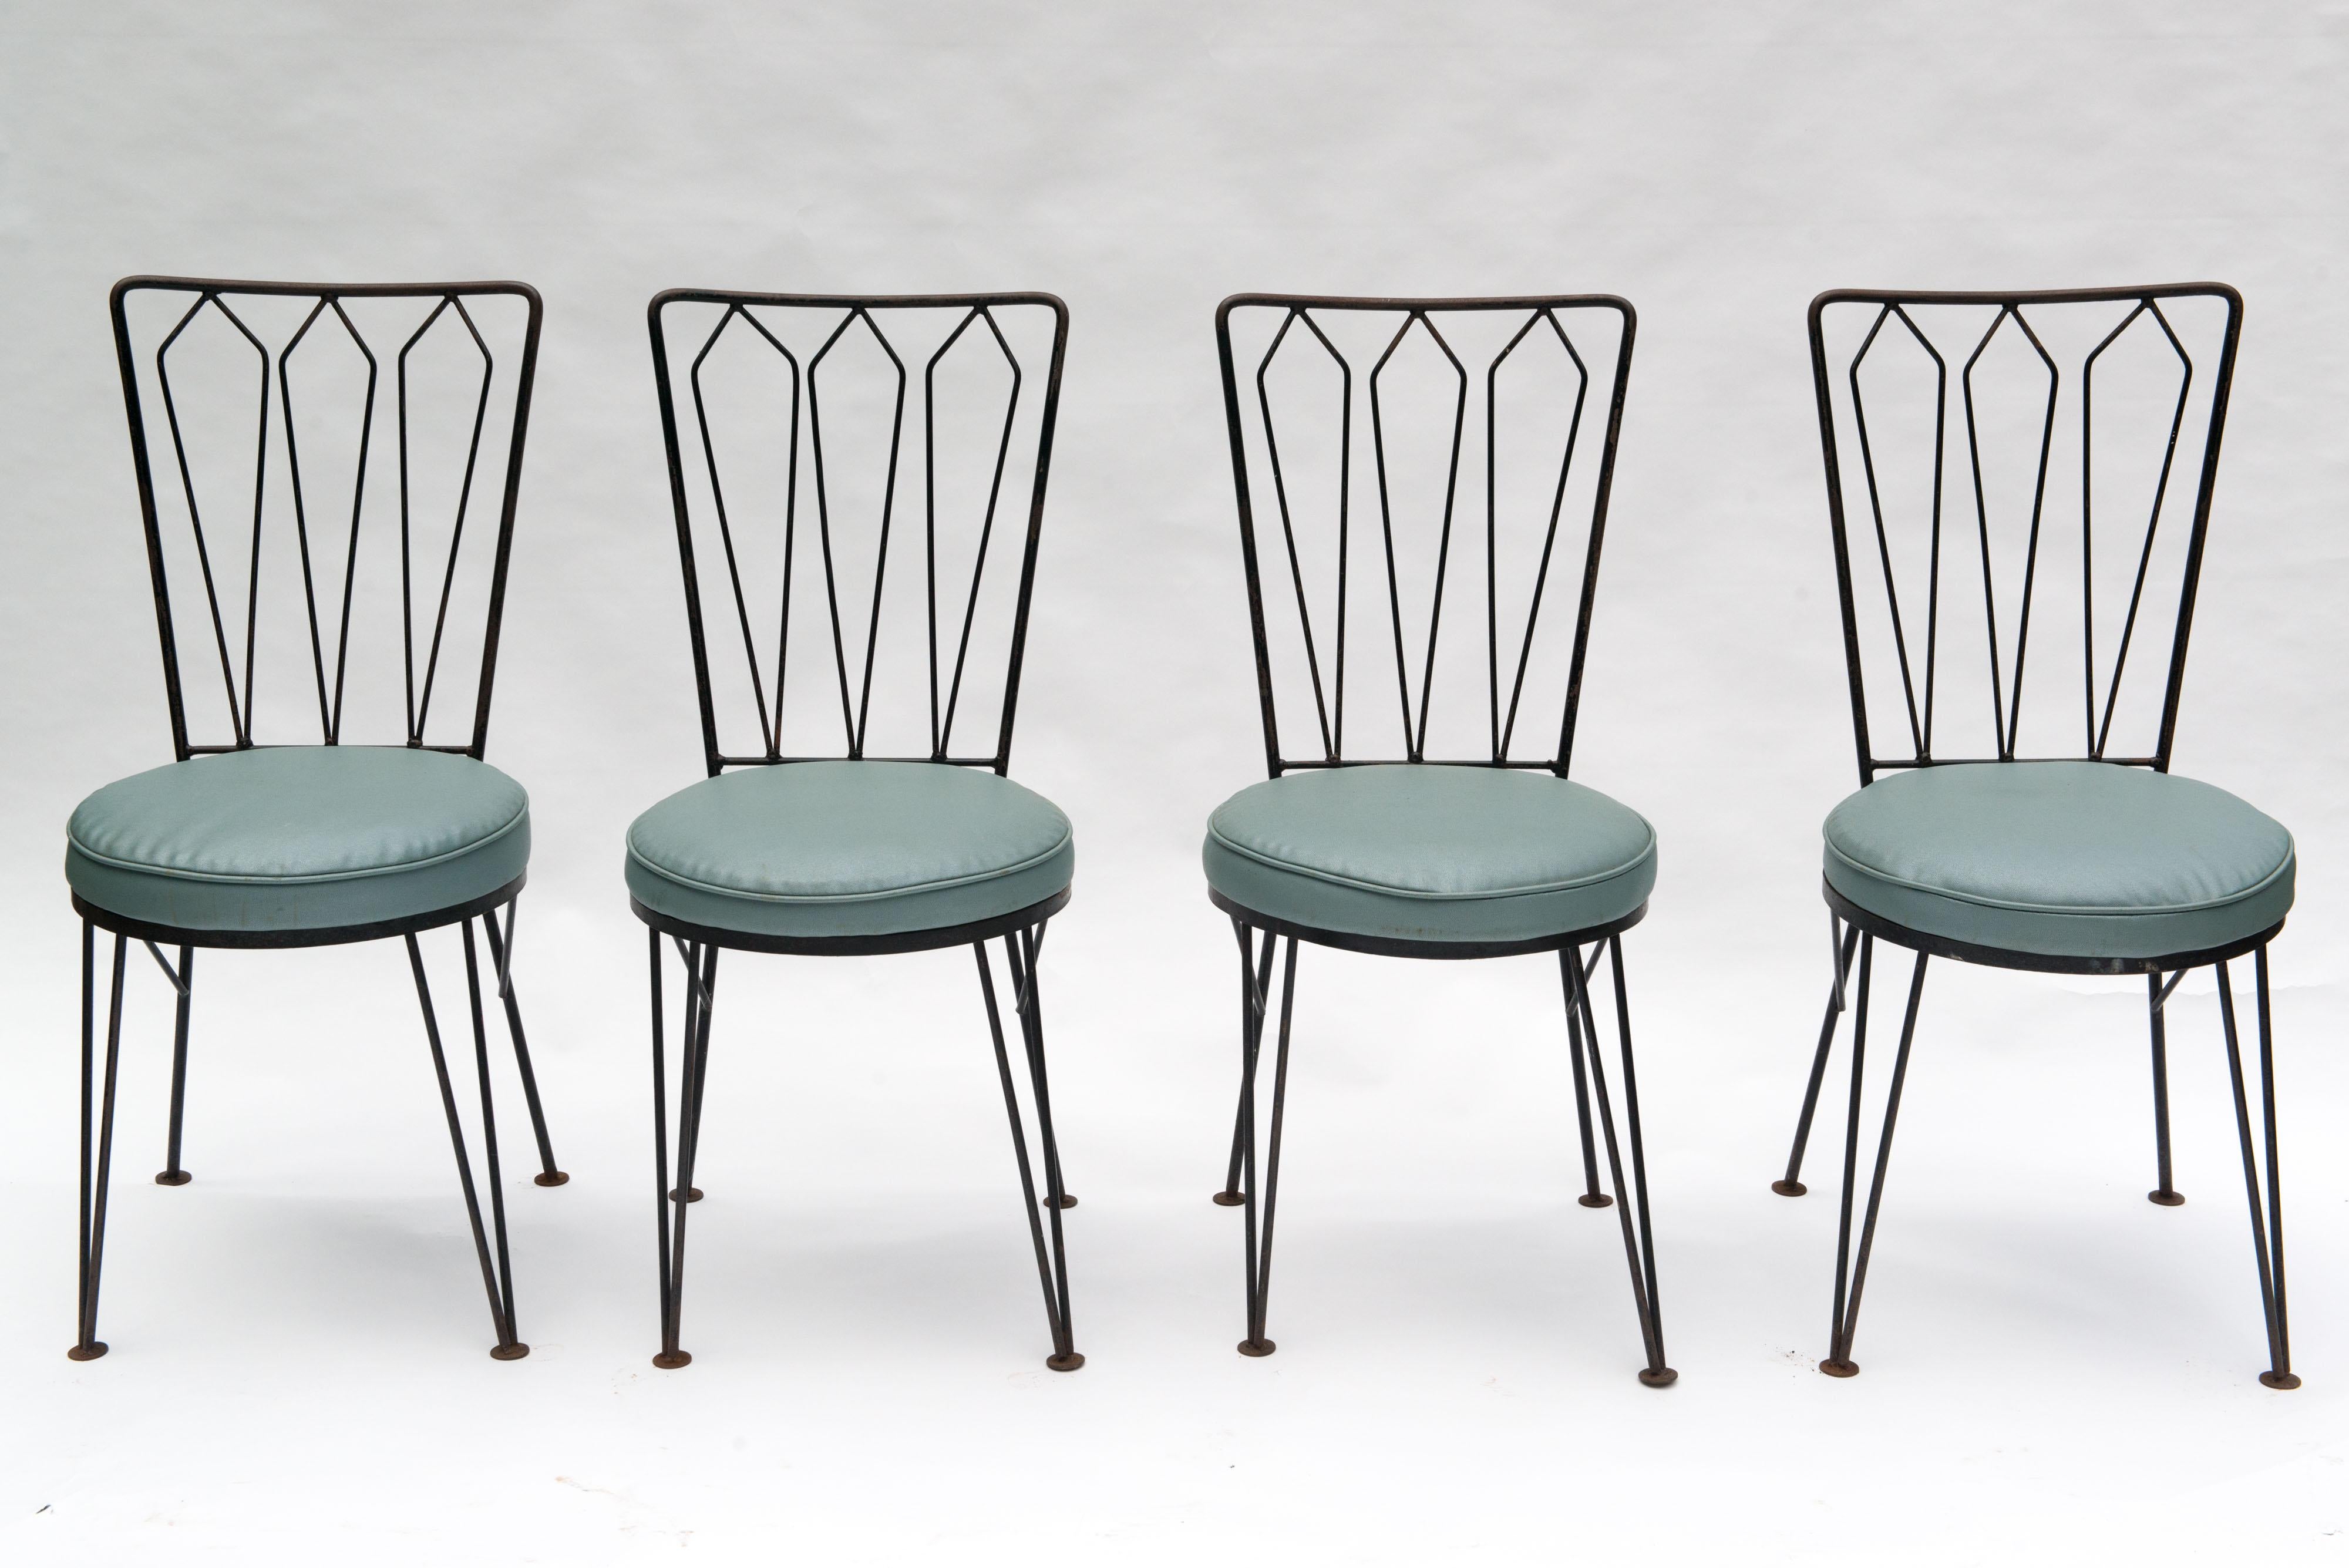 This set of Mid-Century Modern wrought iron dining chairs has the look and high quality construction of Salterini but are made by the Woodard group. Woodard was a high end company in the 1950s. The light blue vinyl seats are original and look good.